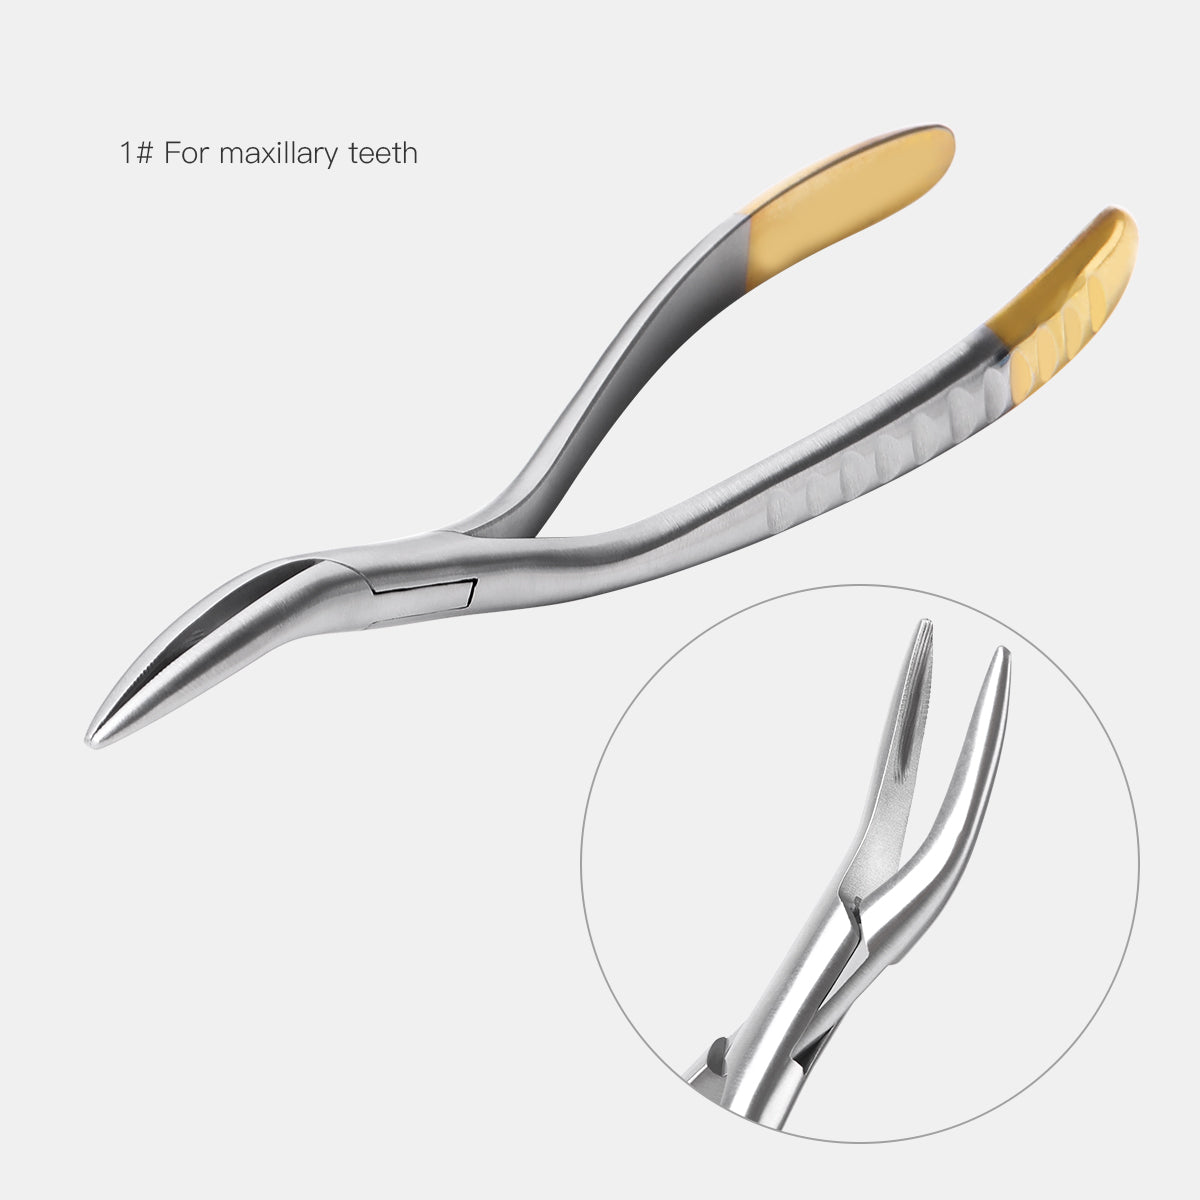 Dental Root Fragment Minimally Invasive Tooth Extraction Forceps Pliers #1 Maxillary Teeth Root - pairaydental.com